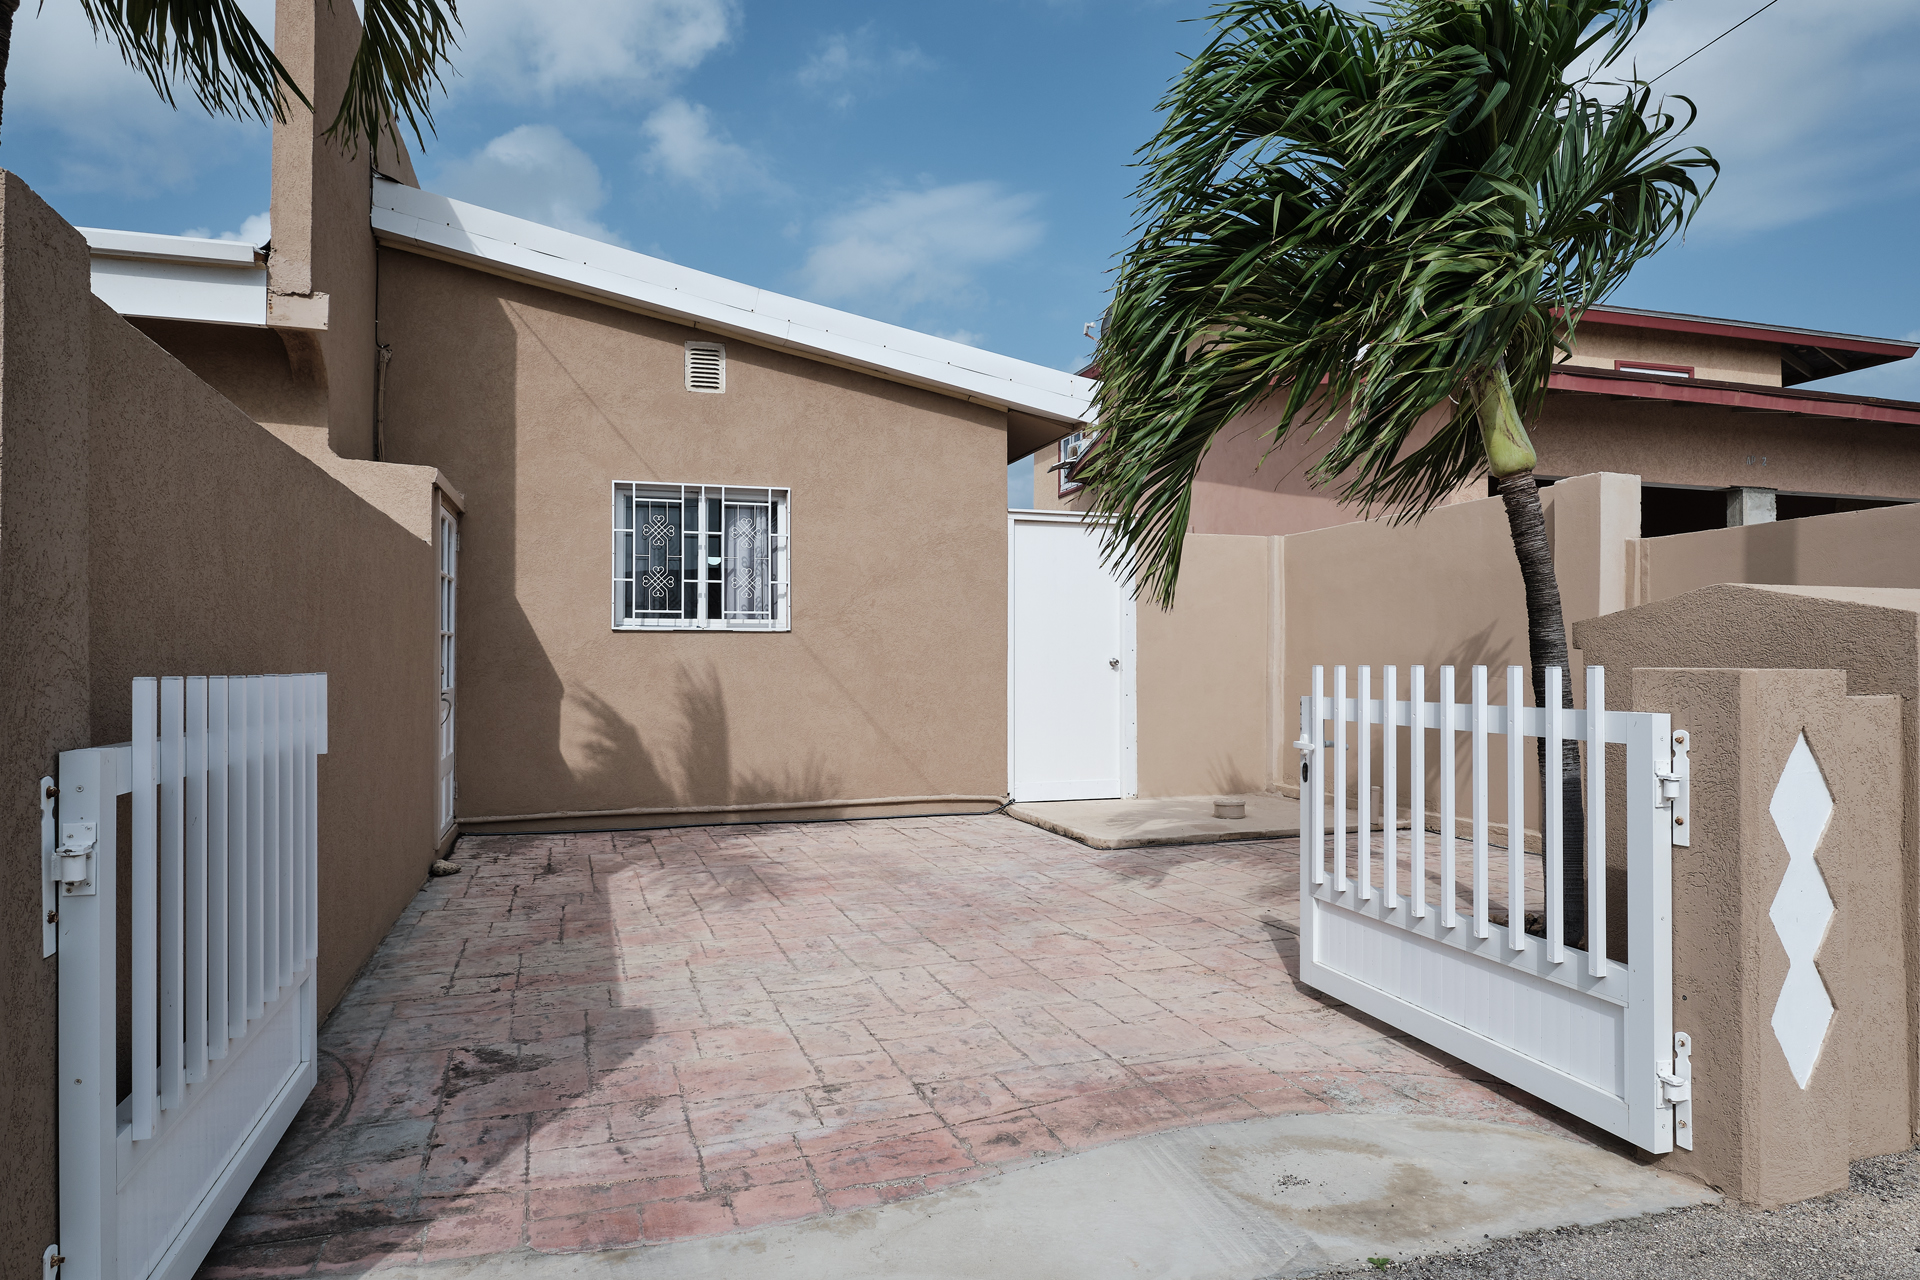 Caya Frere Family Home, Oranjestad, AW, 4 Bedrooms Bedrooms, ,3 BathroomsBathrooms,Residential,For Sale,Caya Frere Family Home,1472526